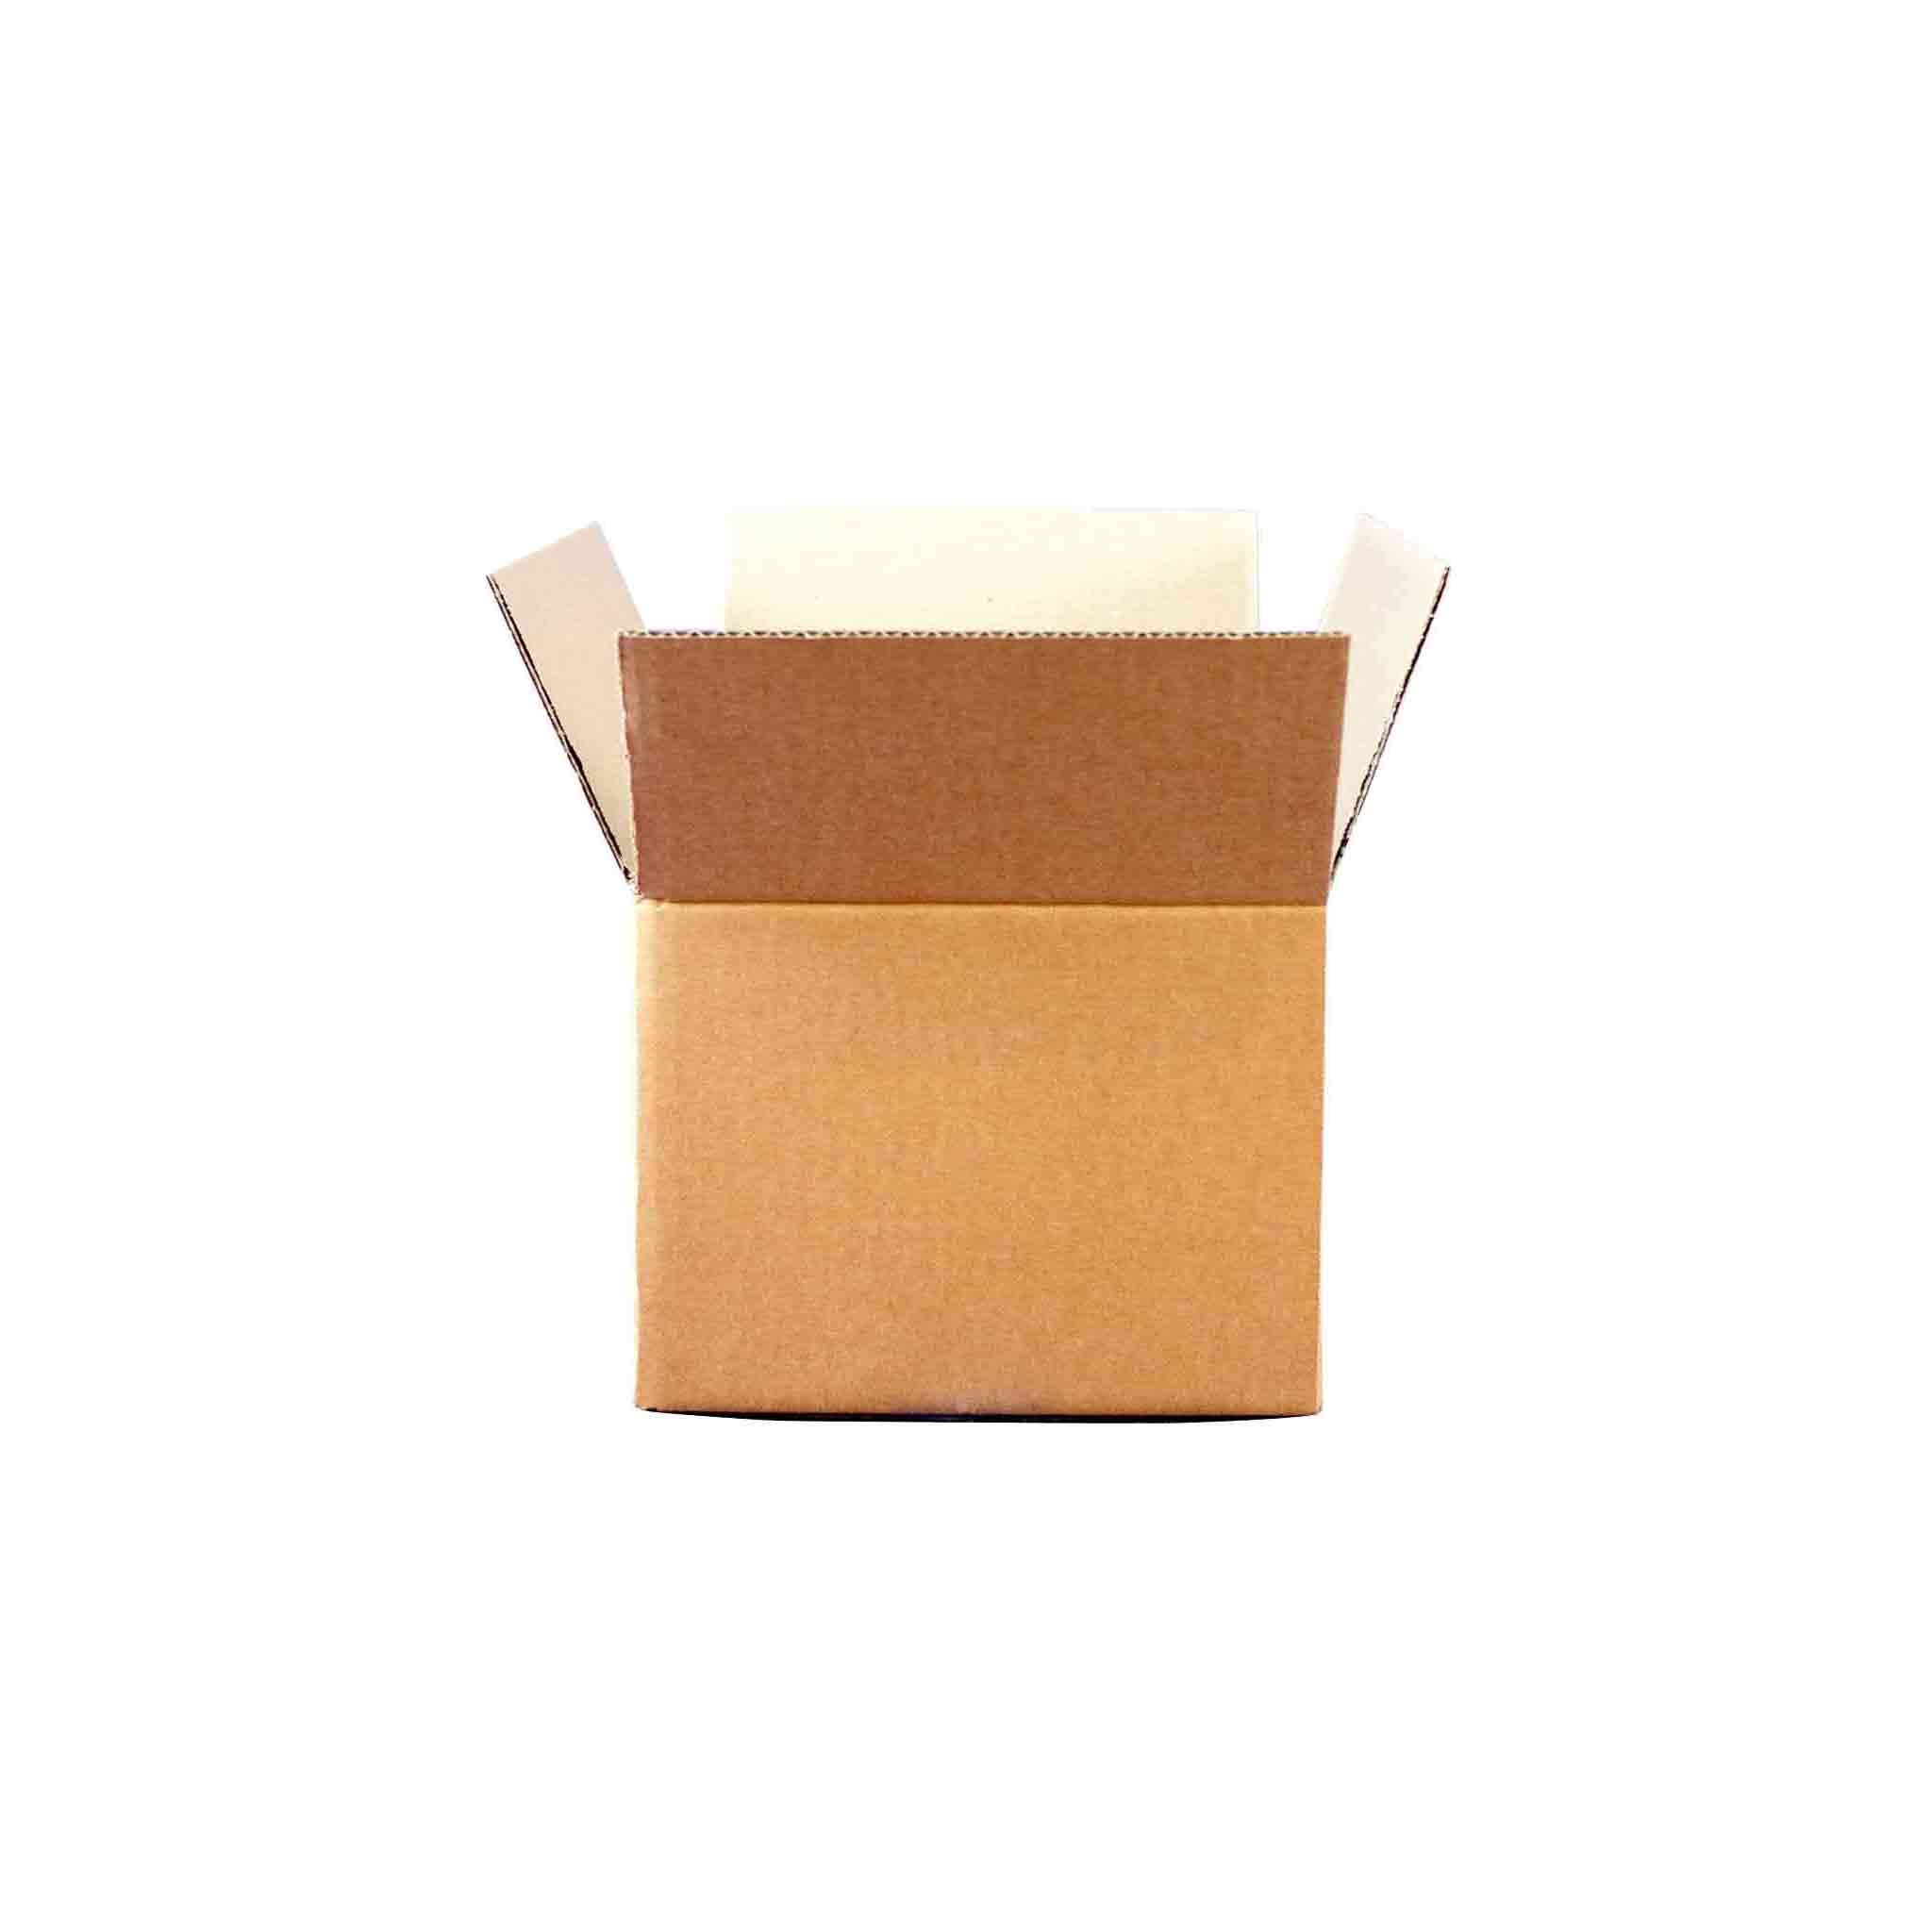 This box is lightweight, durable and made from 100% recyclable corrugated cardboard